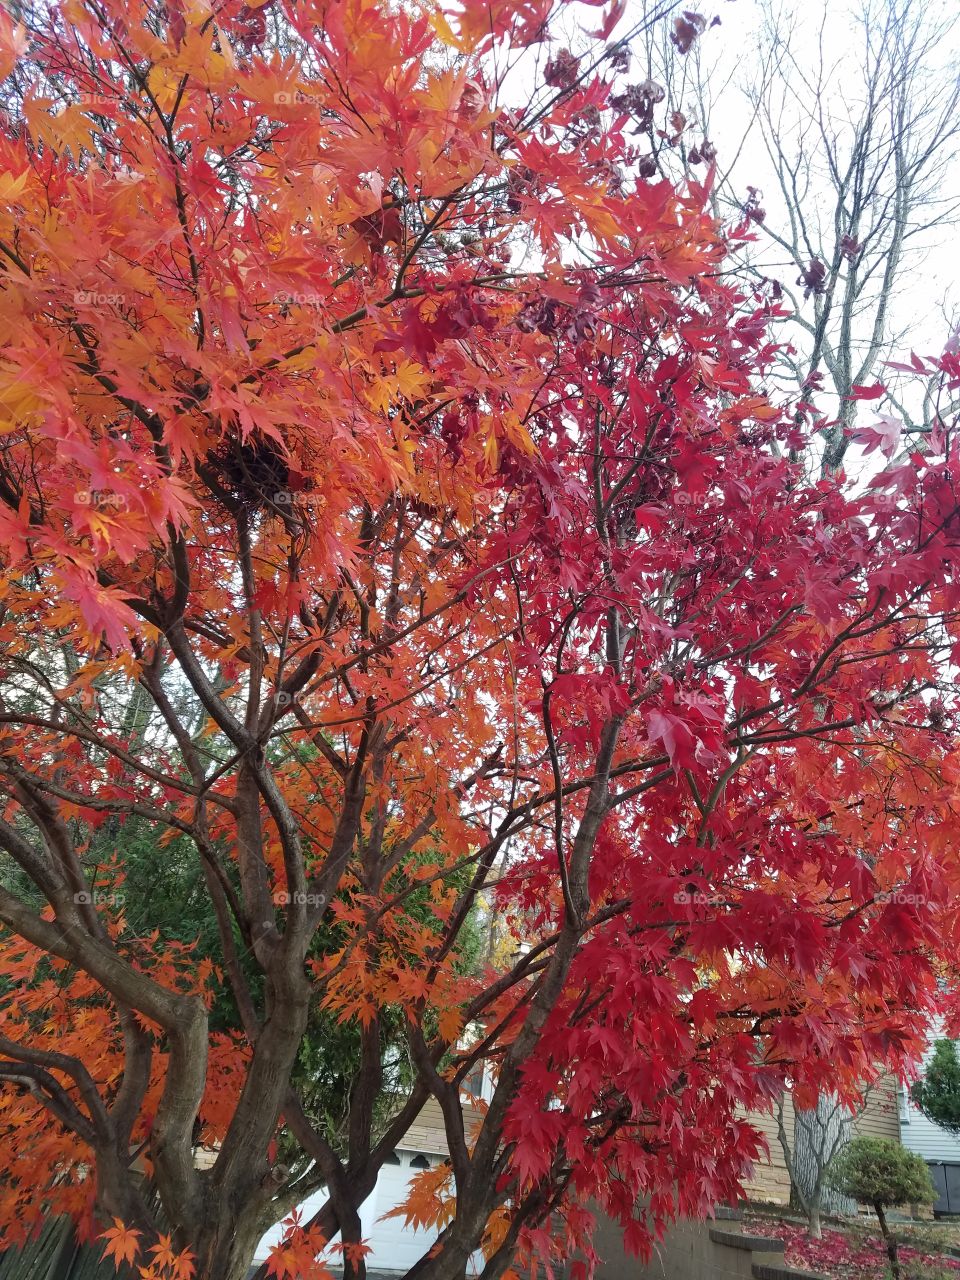 Red and orange leaves on trees